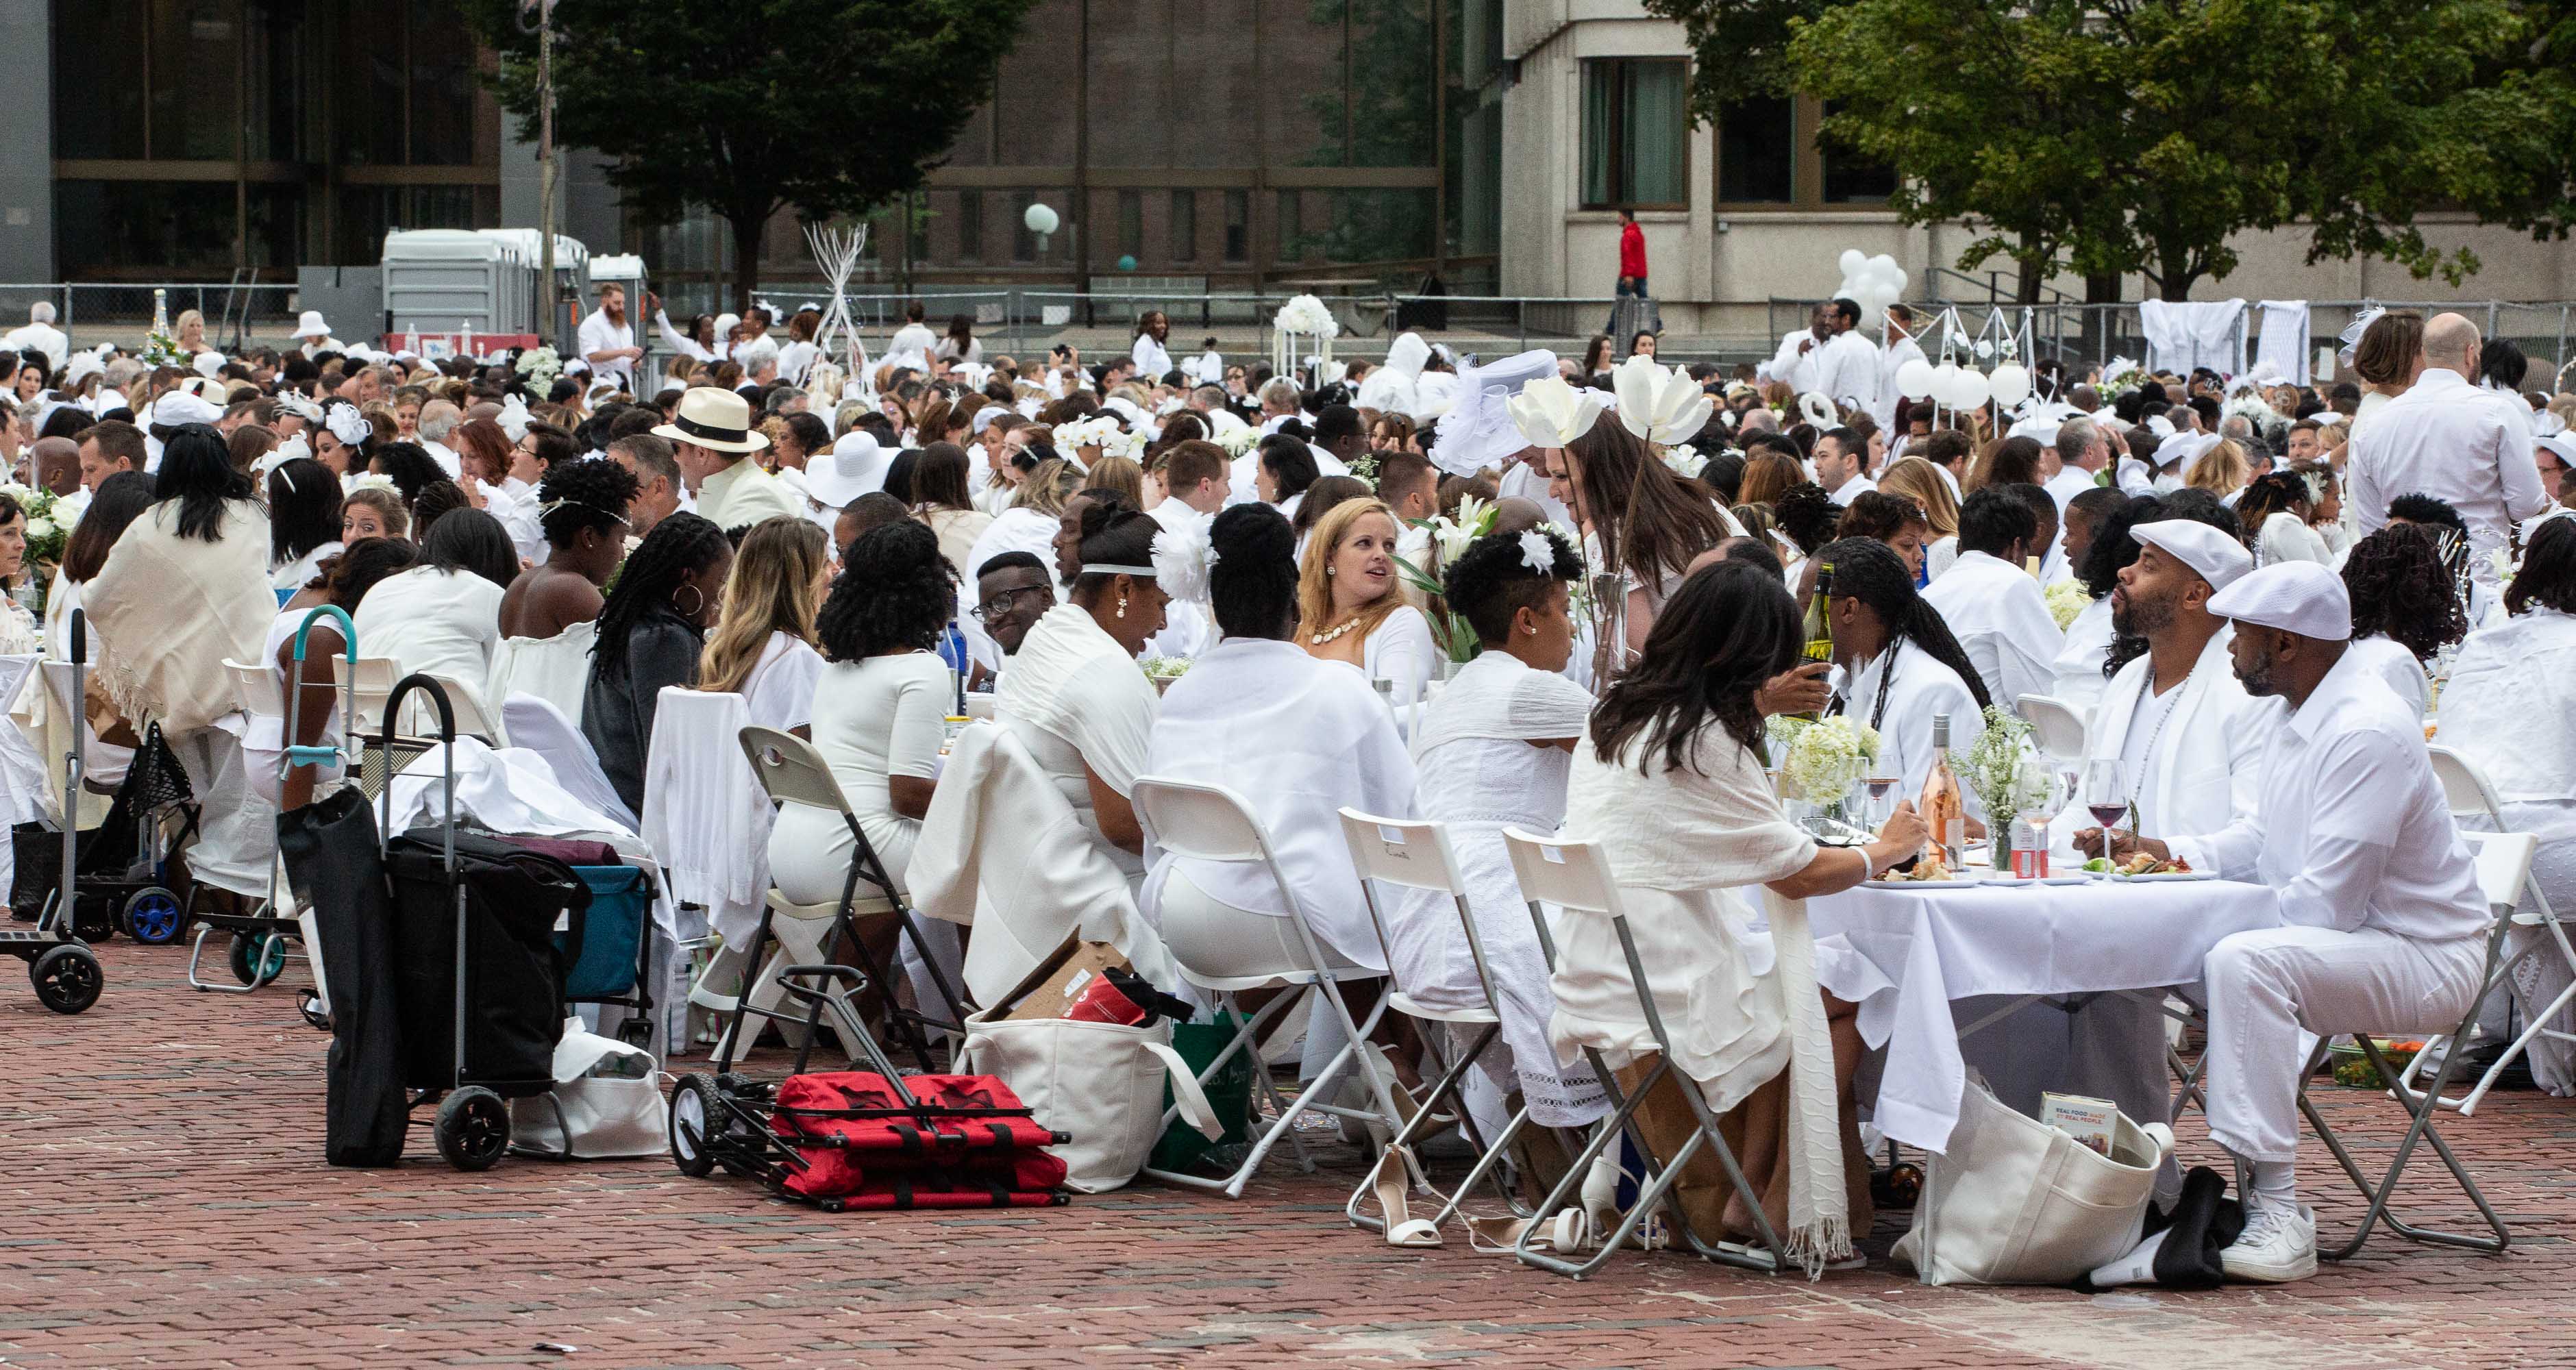 (Shhhh!) This year’s exclusive and secret Le Diner en Blanc was held on